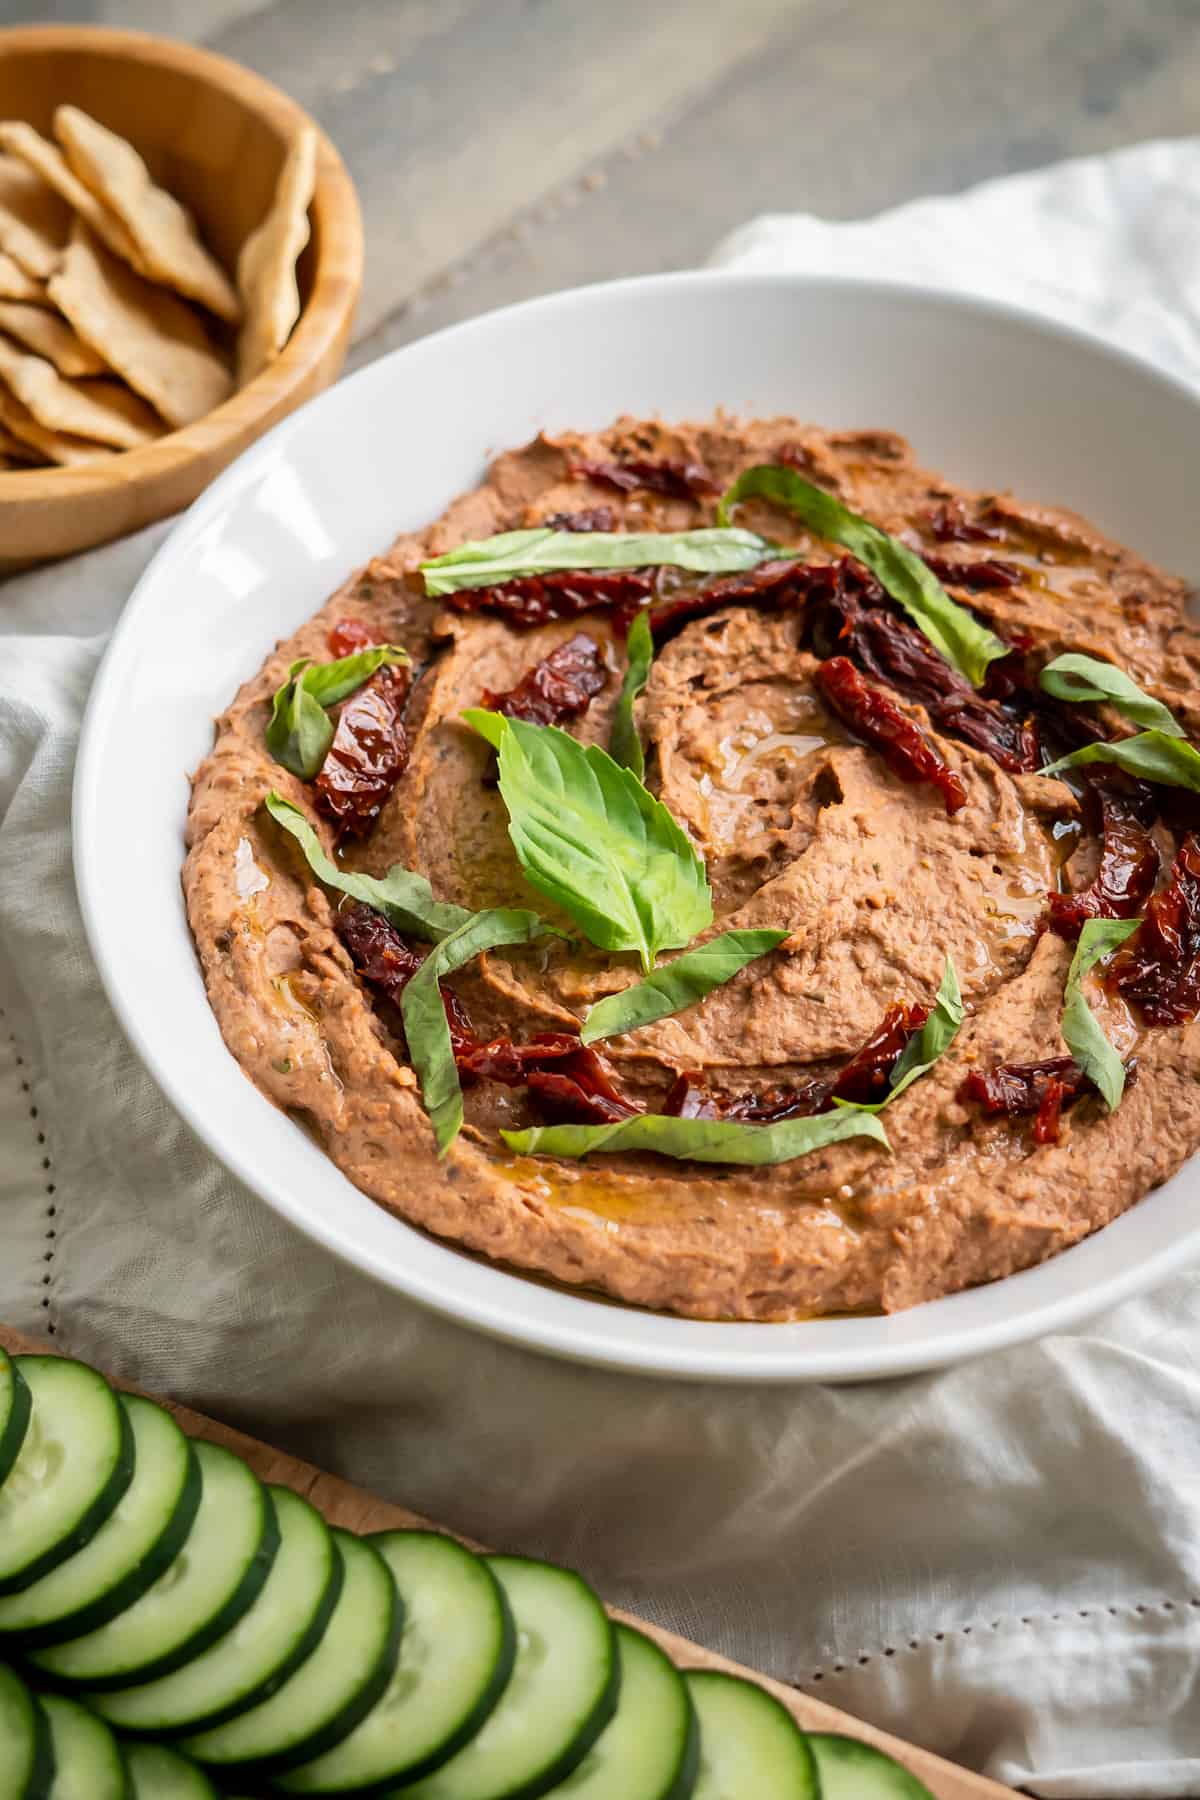 A bowl of creamy black bean hummus decorated with pieces of sun-dried tomatoes and basil leaves.